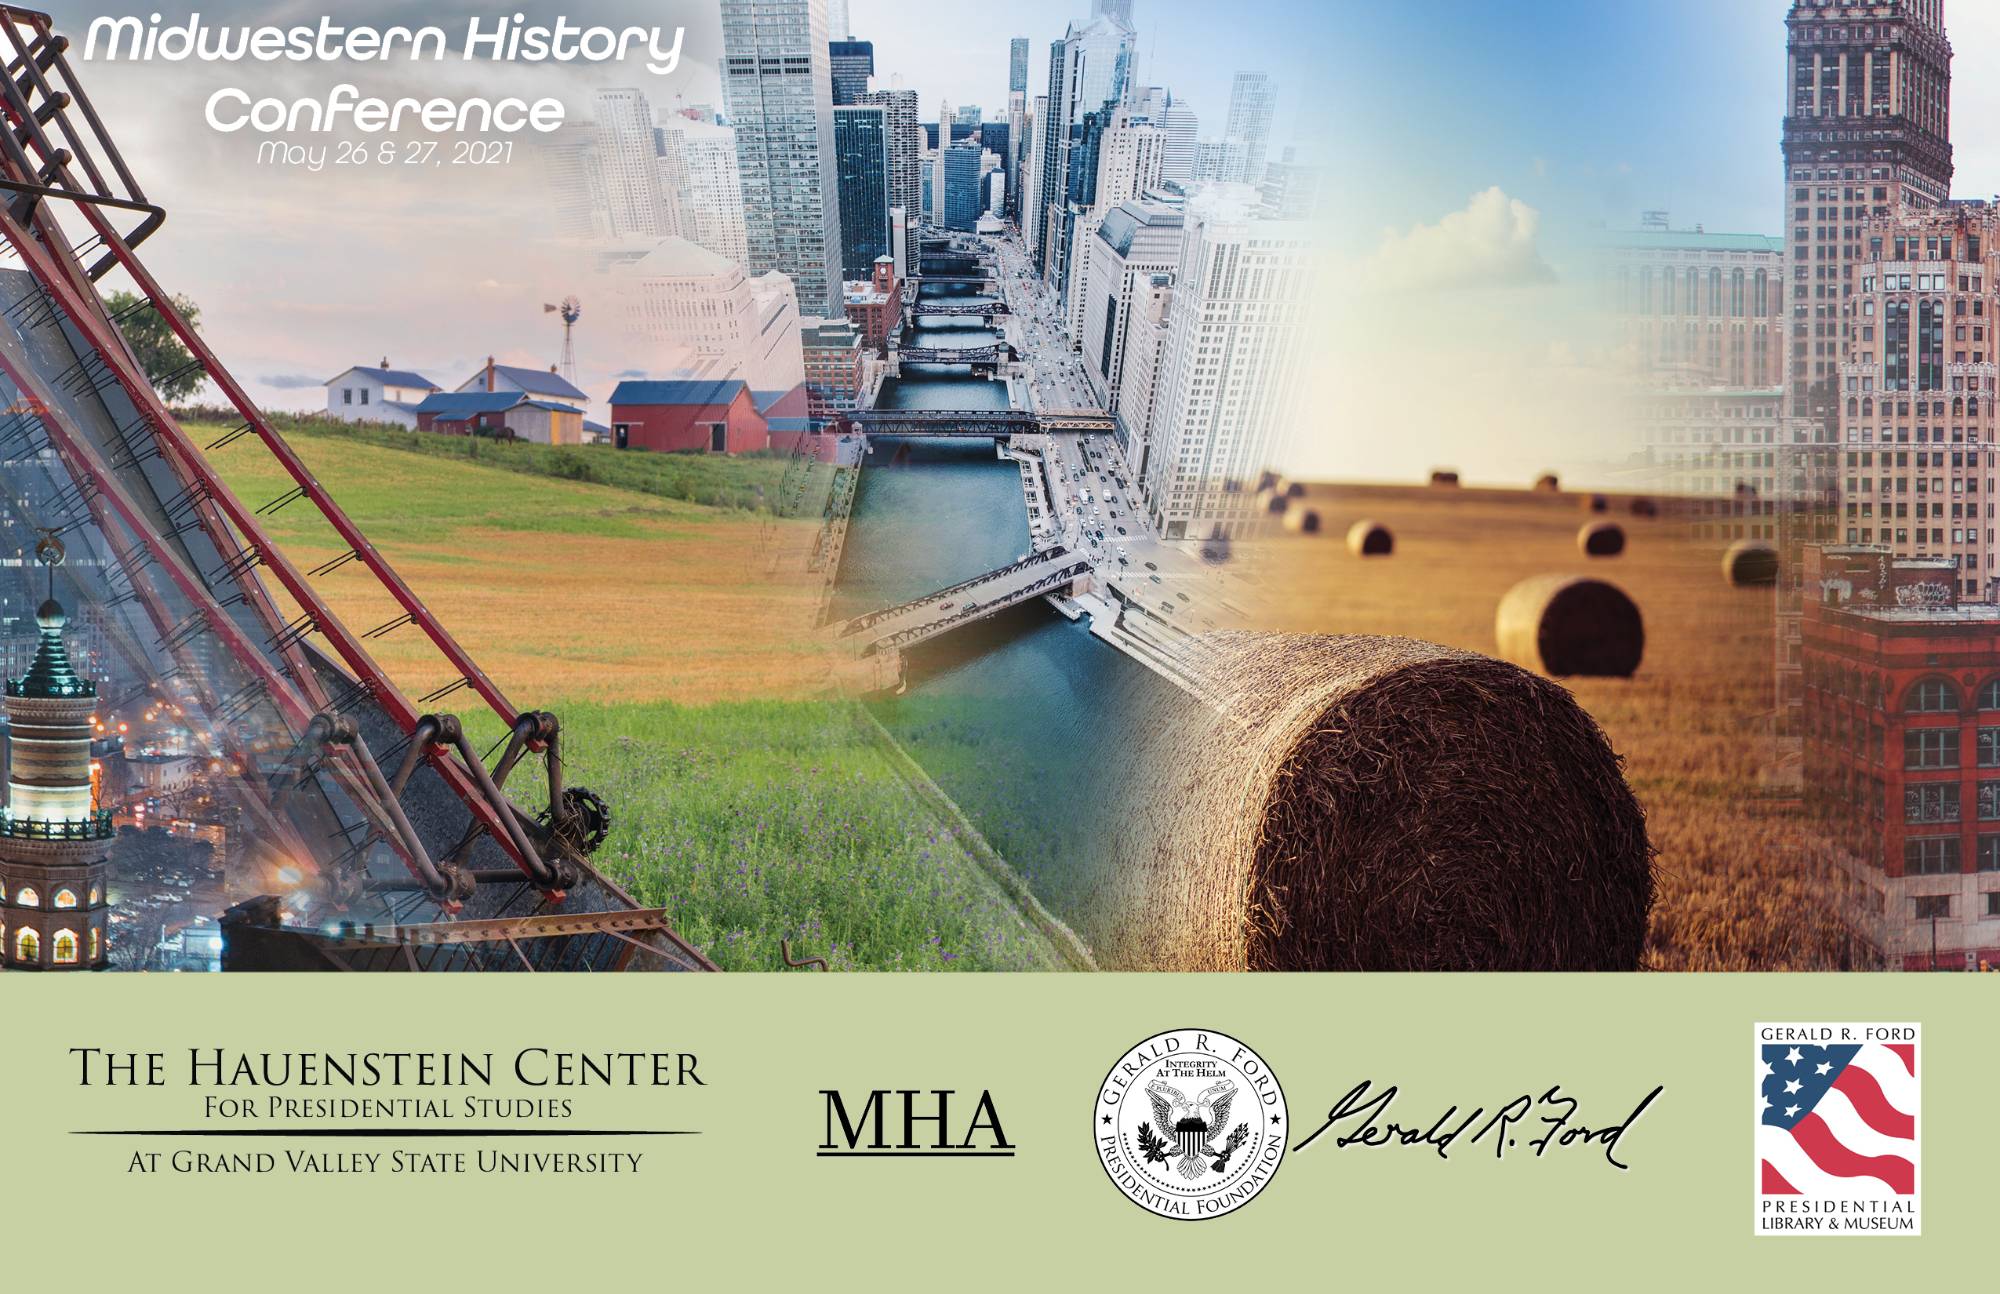 Midwestern History Conference 2021: The Midwest at the Intersection of Past and Present